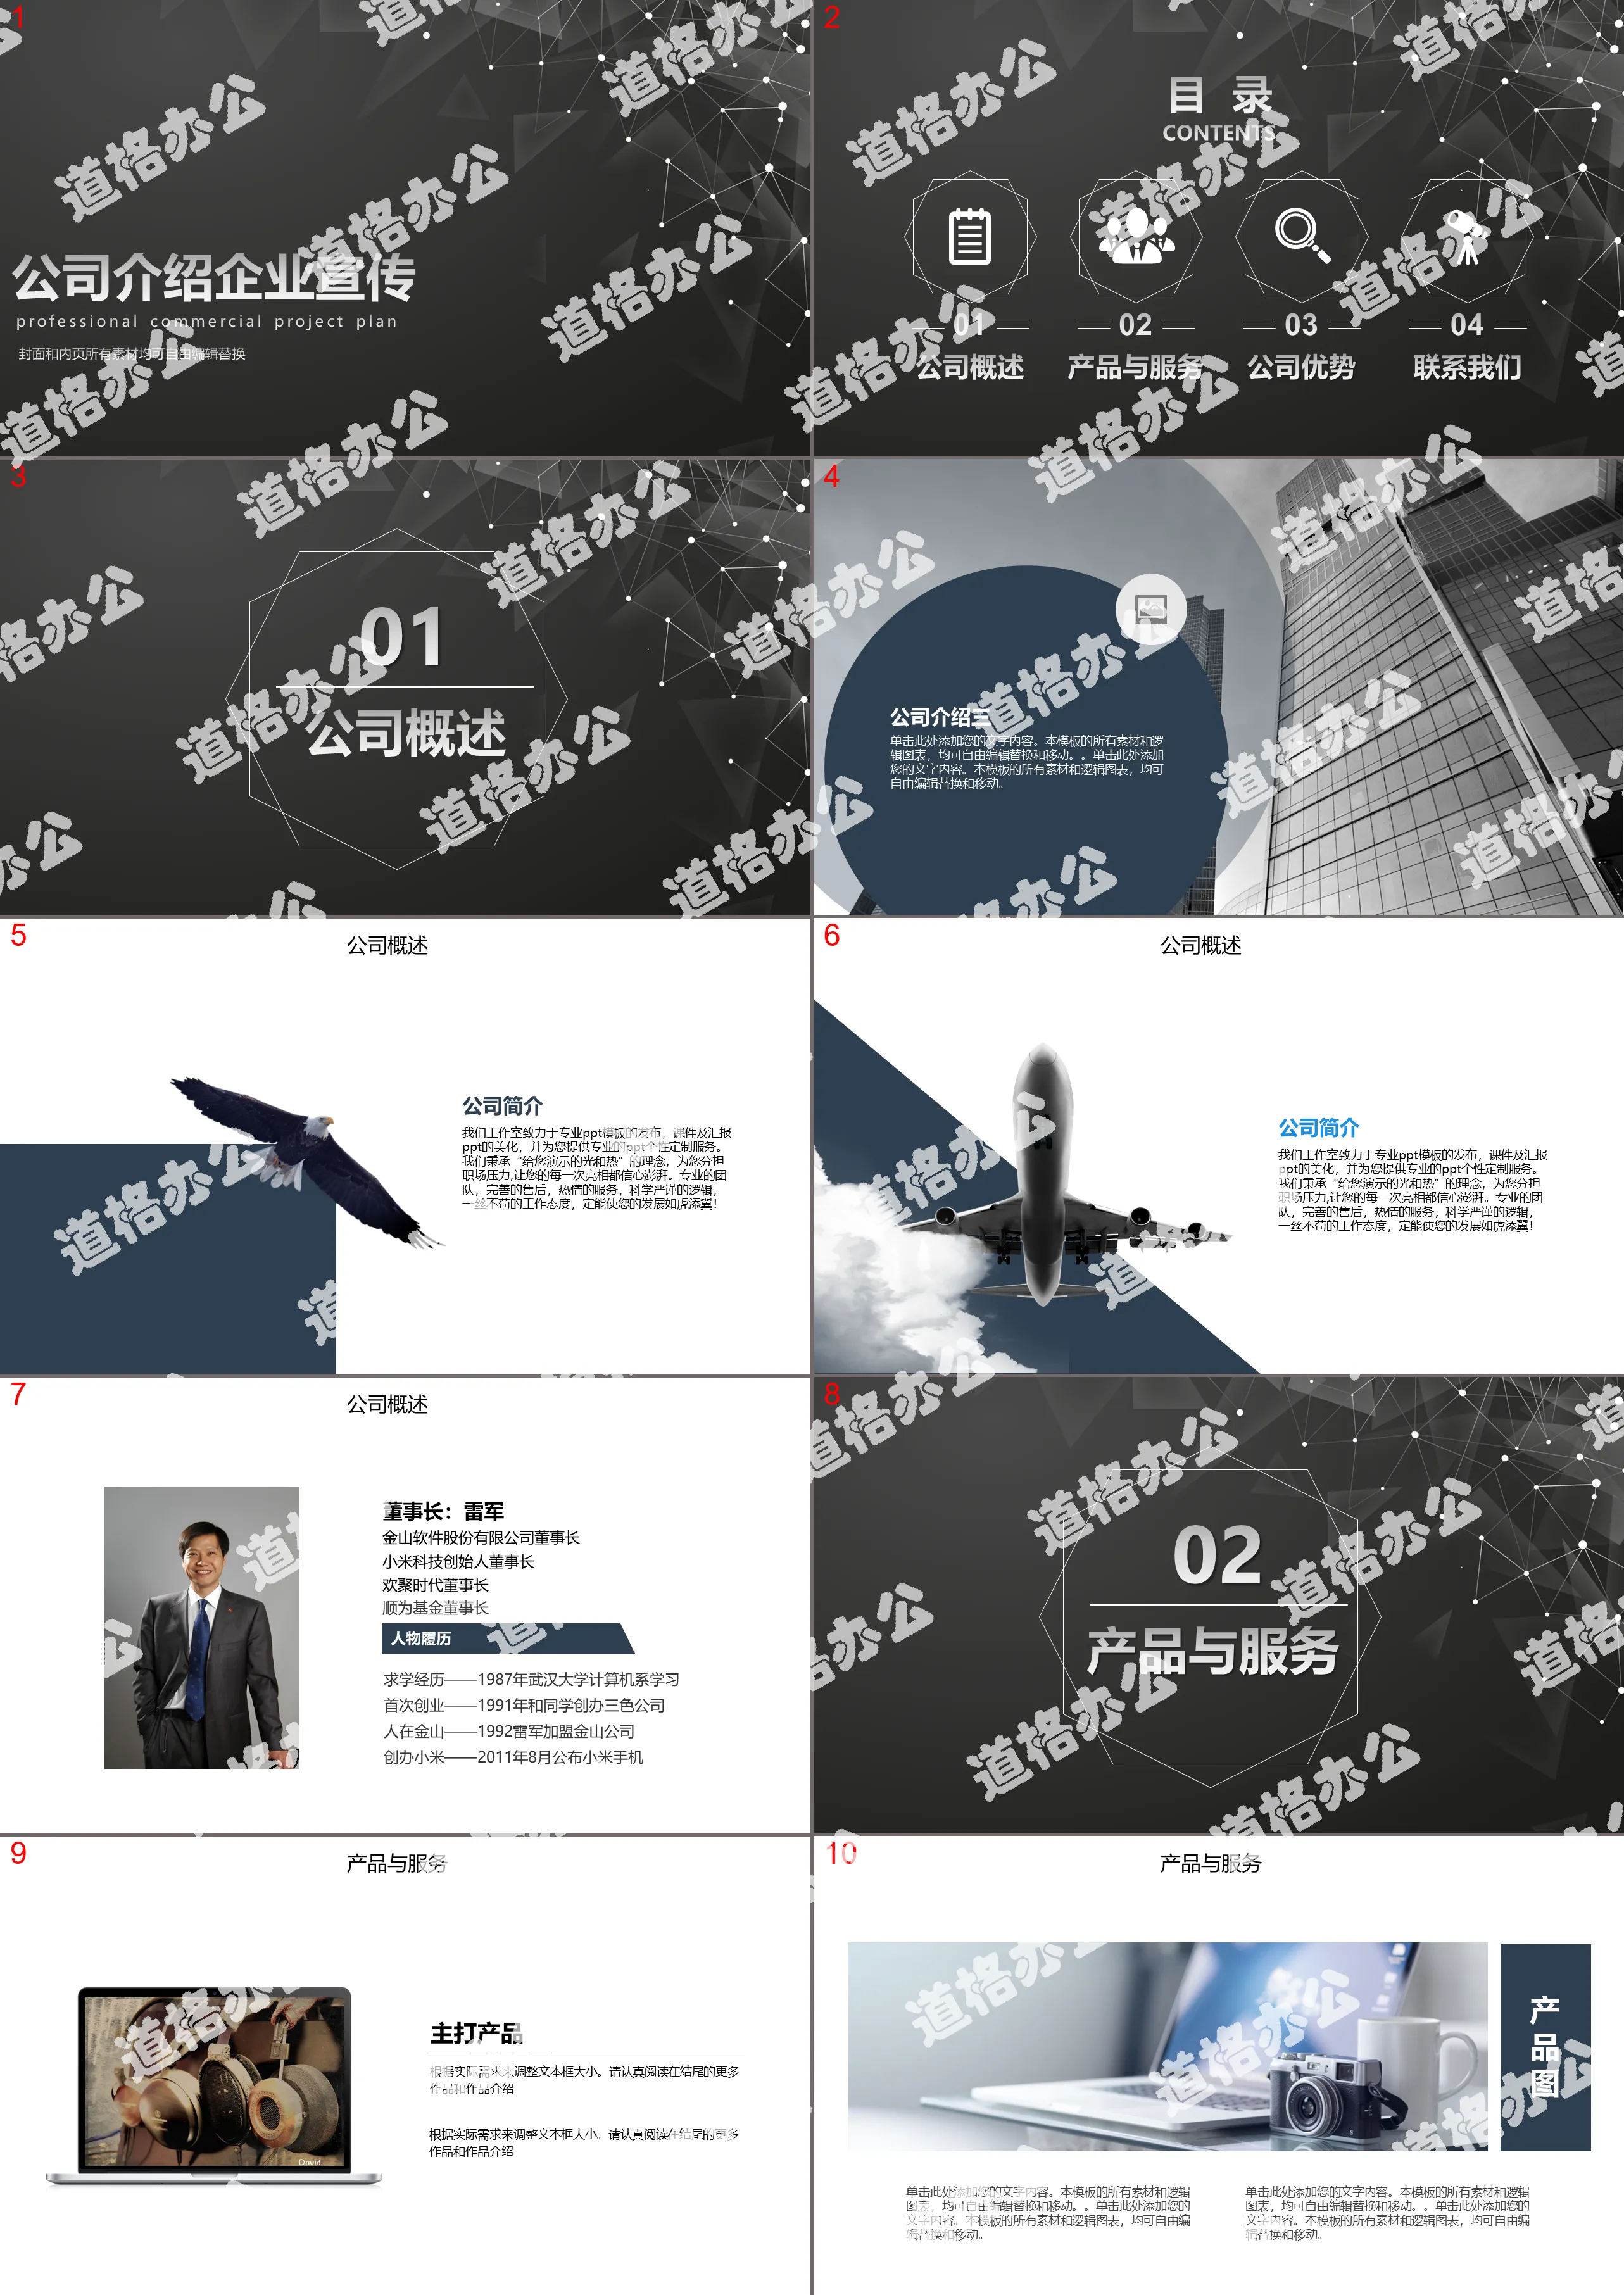 Company profile PPT template with gray polygonal background